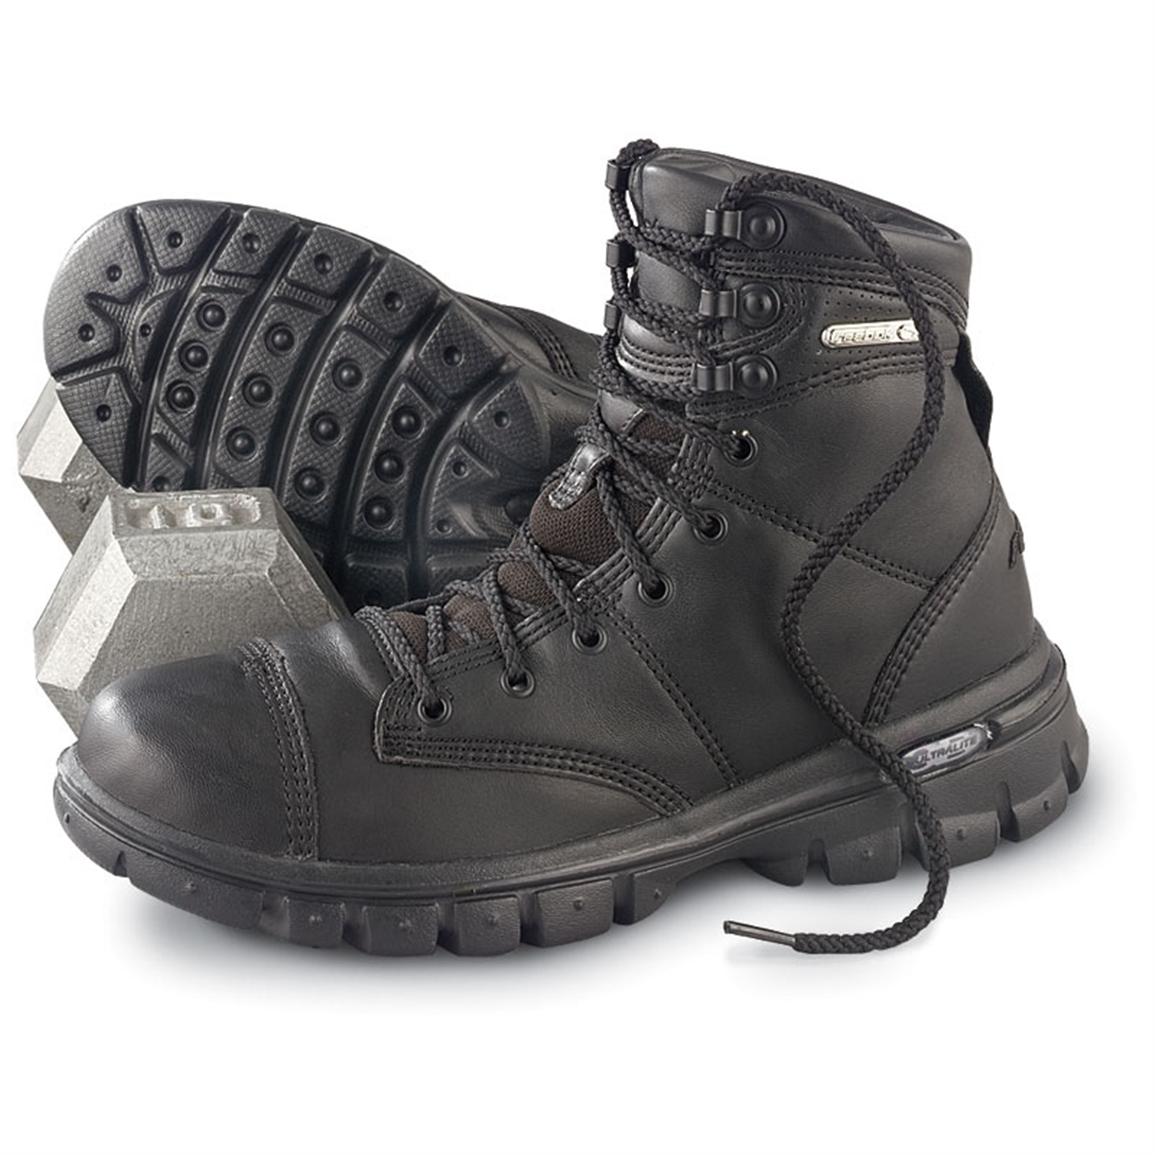 Selling - reebok workout boots - OFF 60 